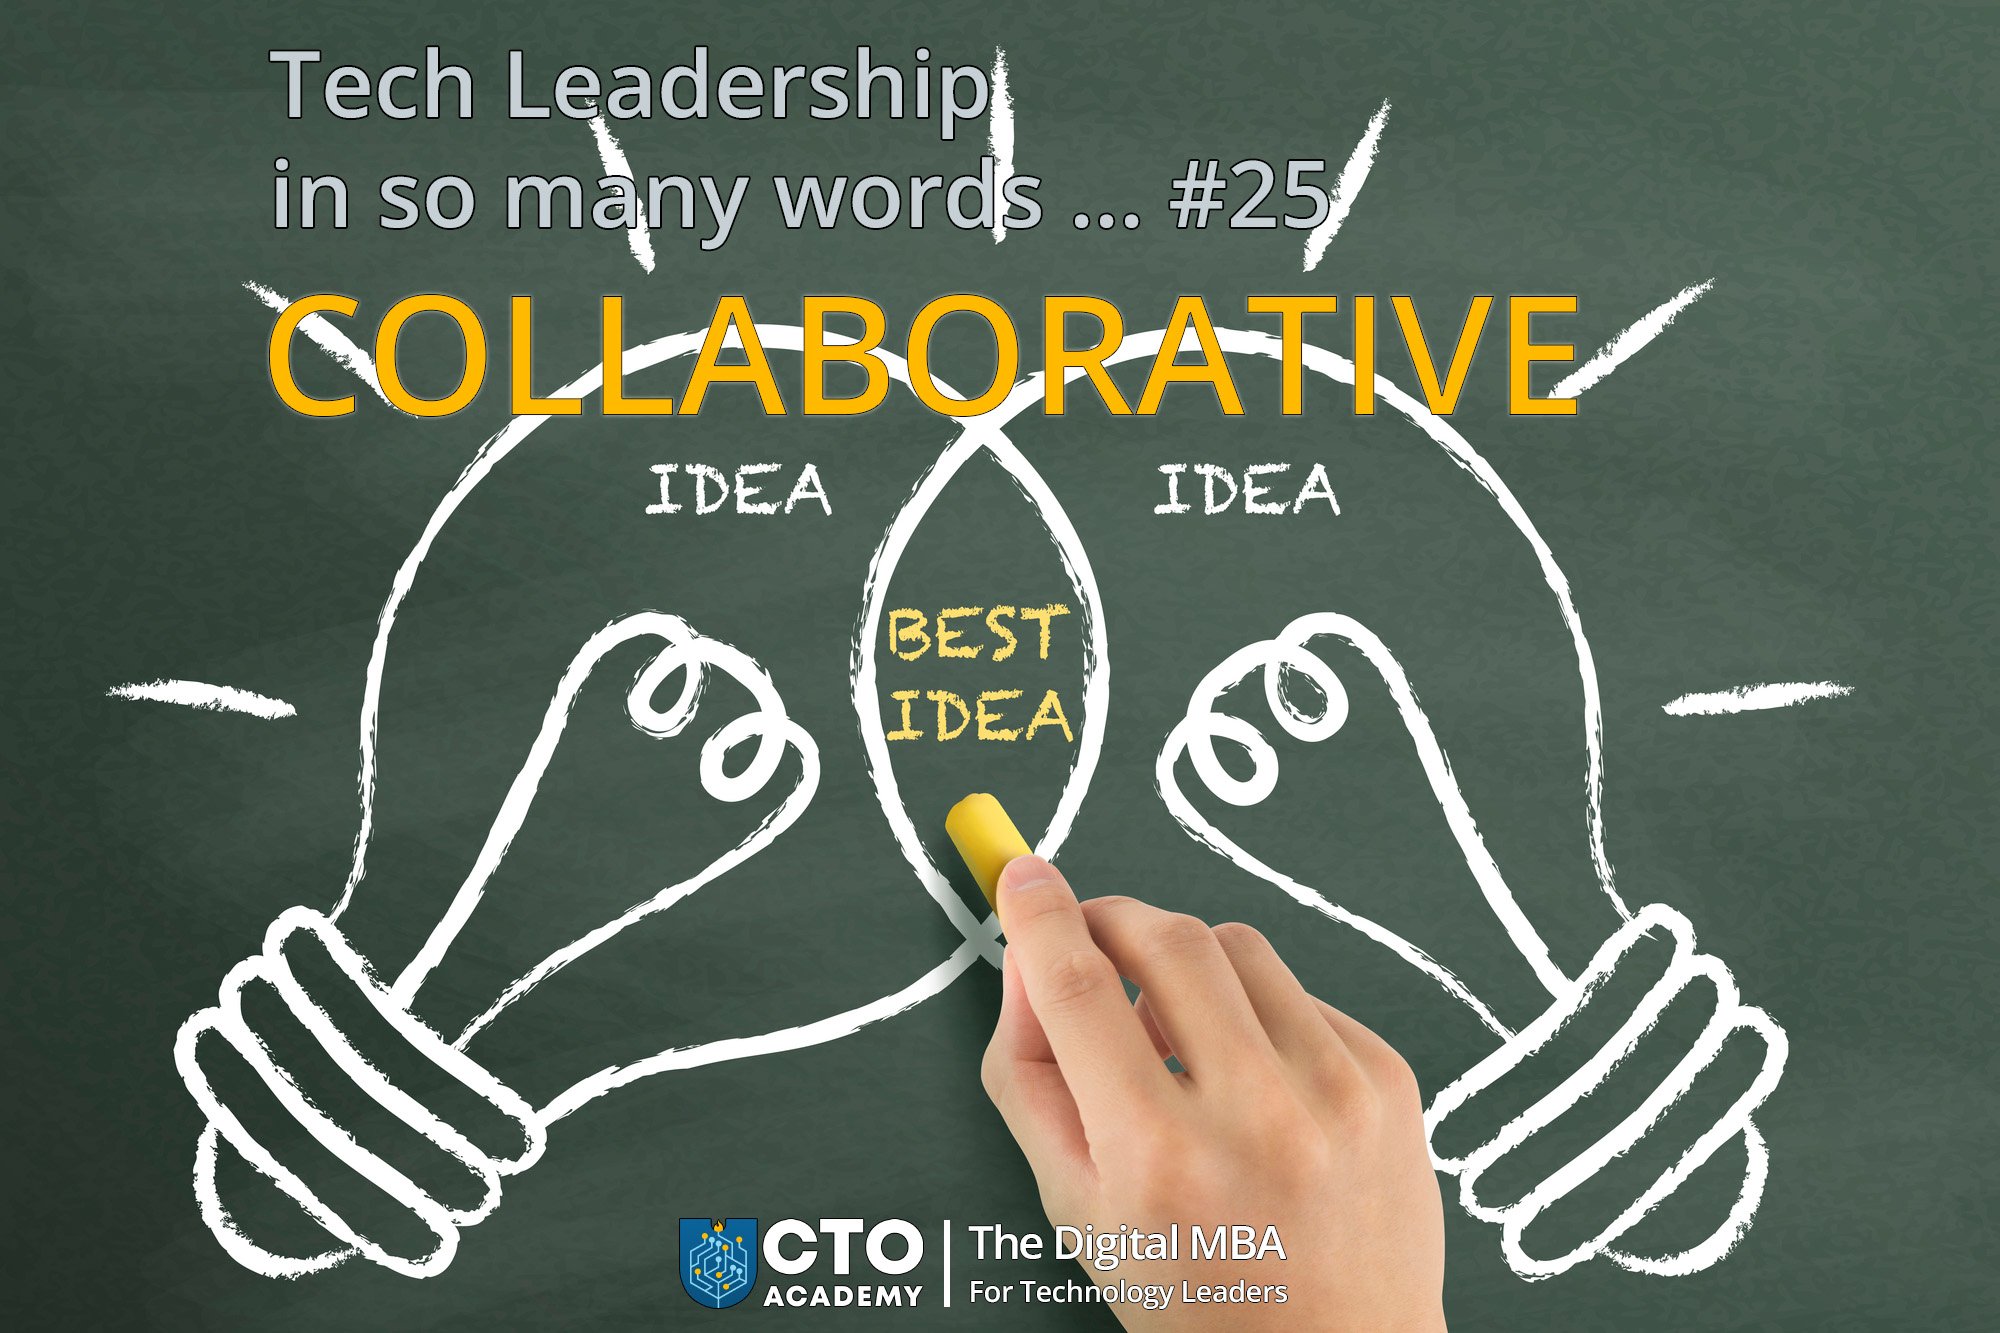 Tech Leadership in So Many Words - #25 - Collaborative